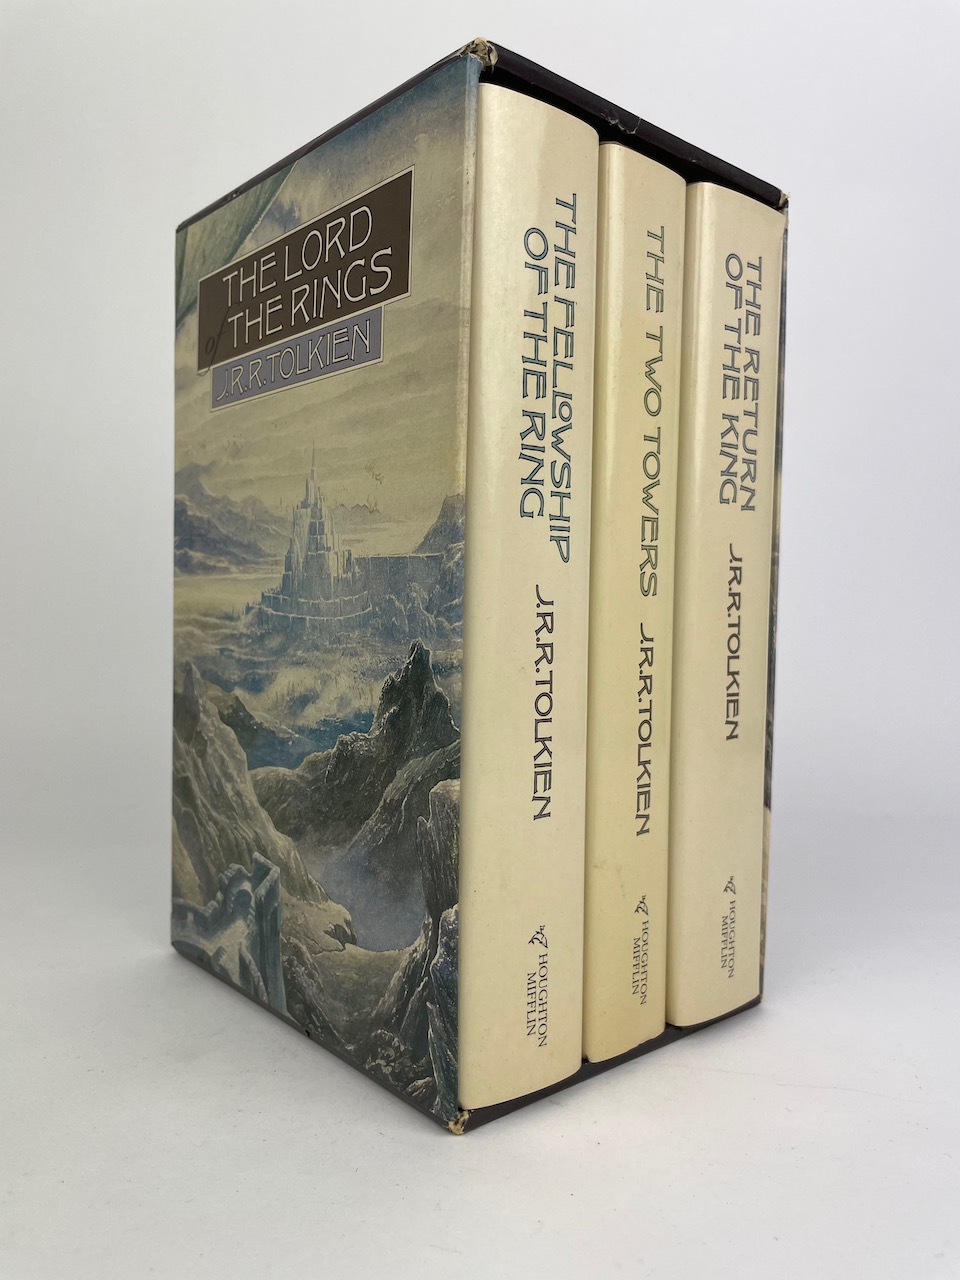 The Lord of the Rings JRR Tolkien Alan Lee set from 1988, by Houghton Mifflin